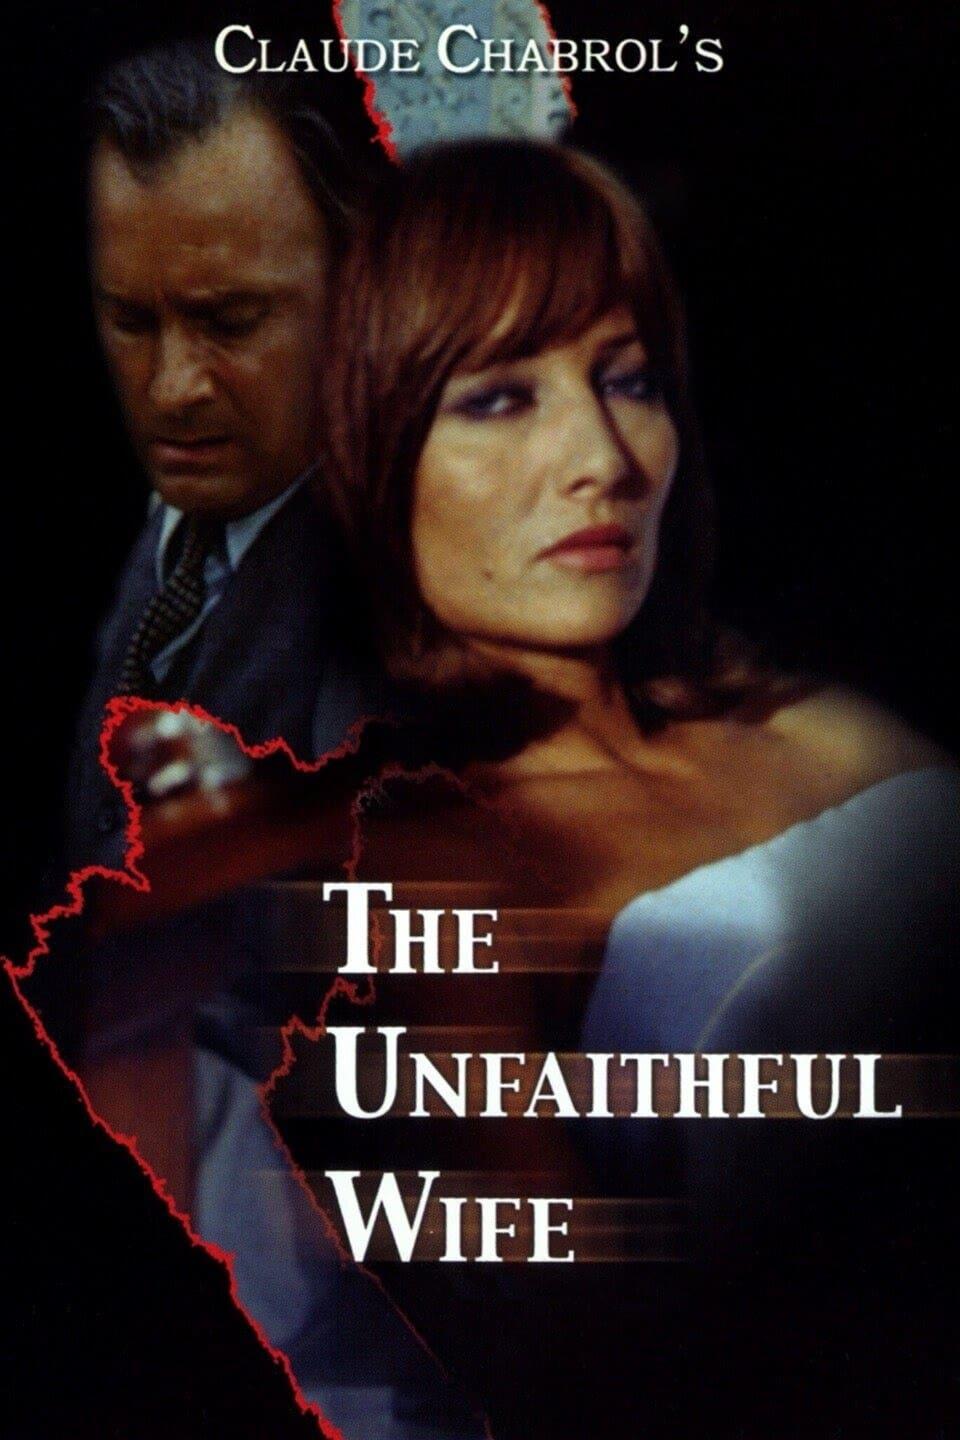 The Unfaithful Wife poster